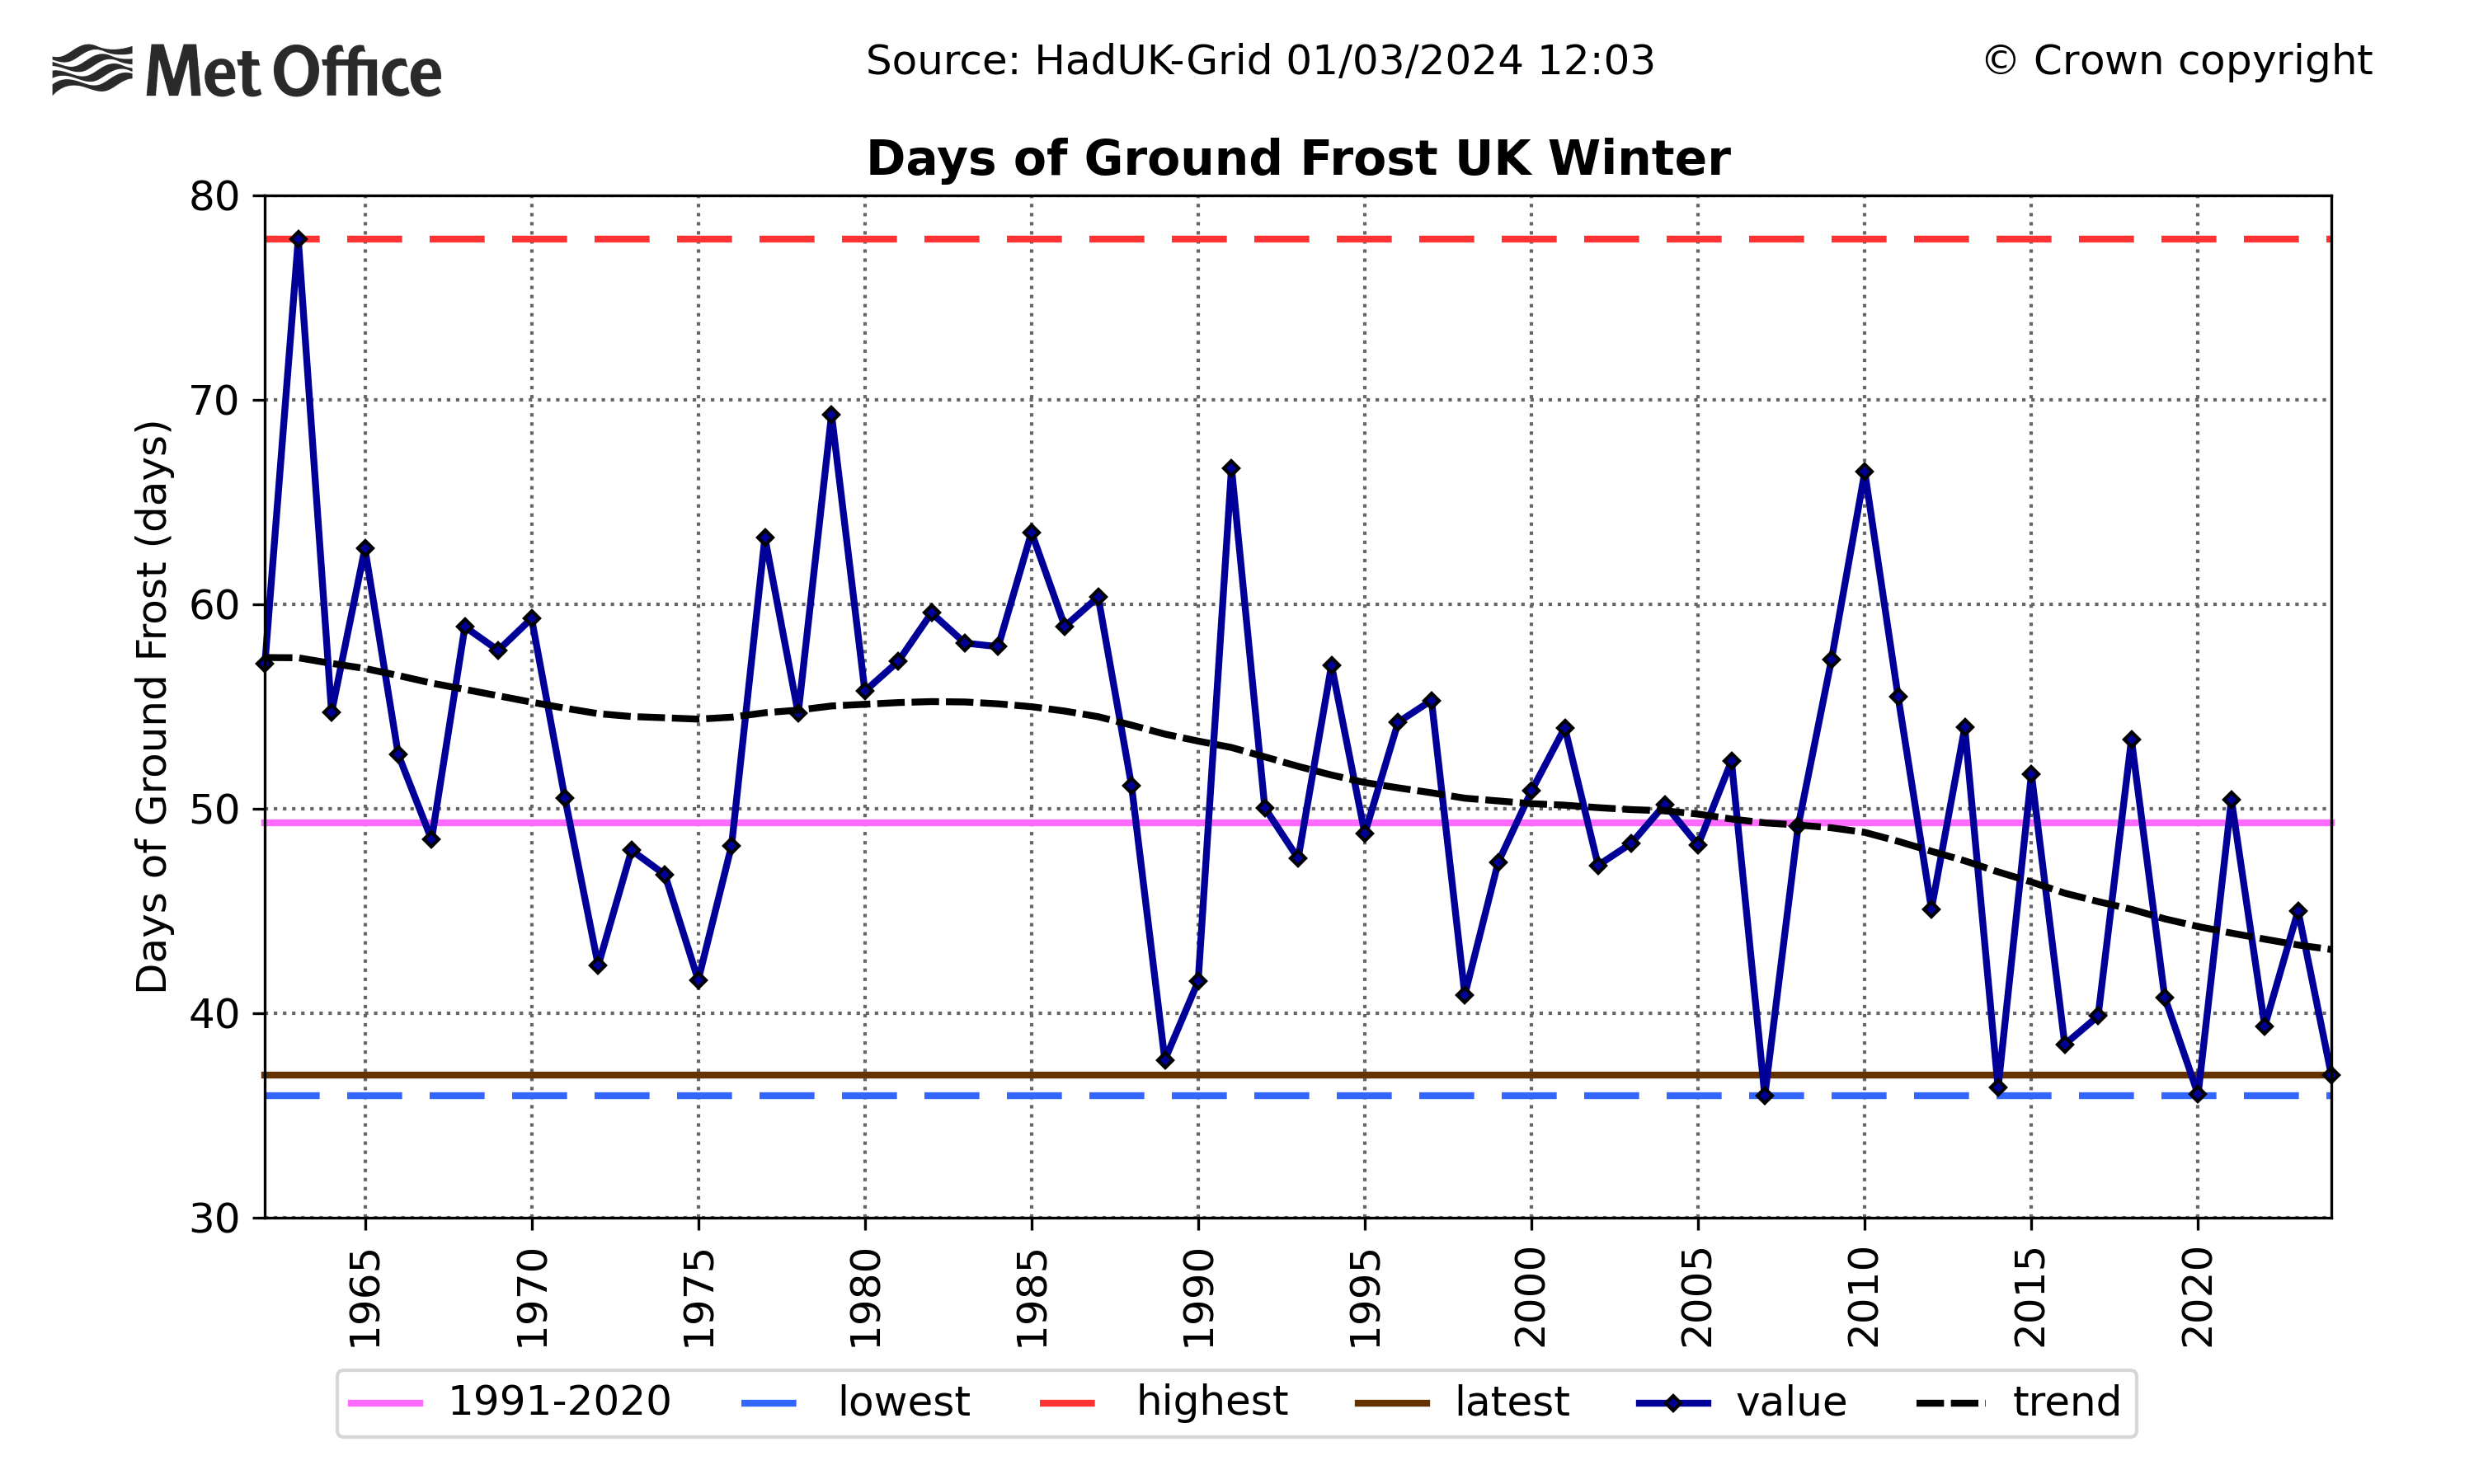 Graph showing winter ground frosts in the uK since the 1960s. The graph shows year-to-year variability, but a downward trend.